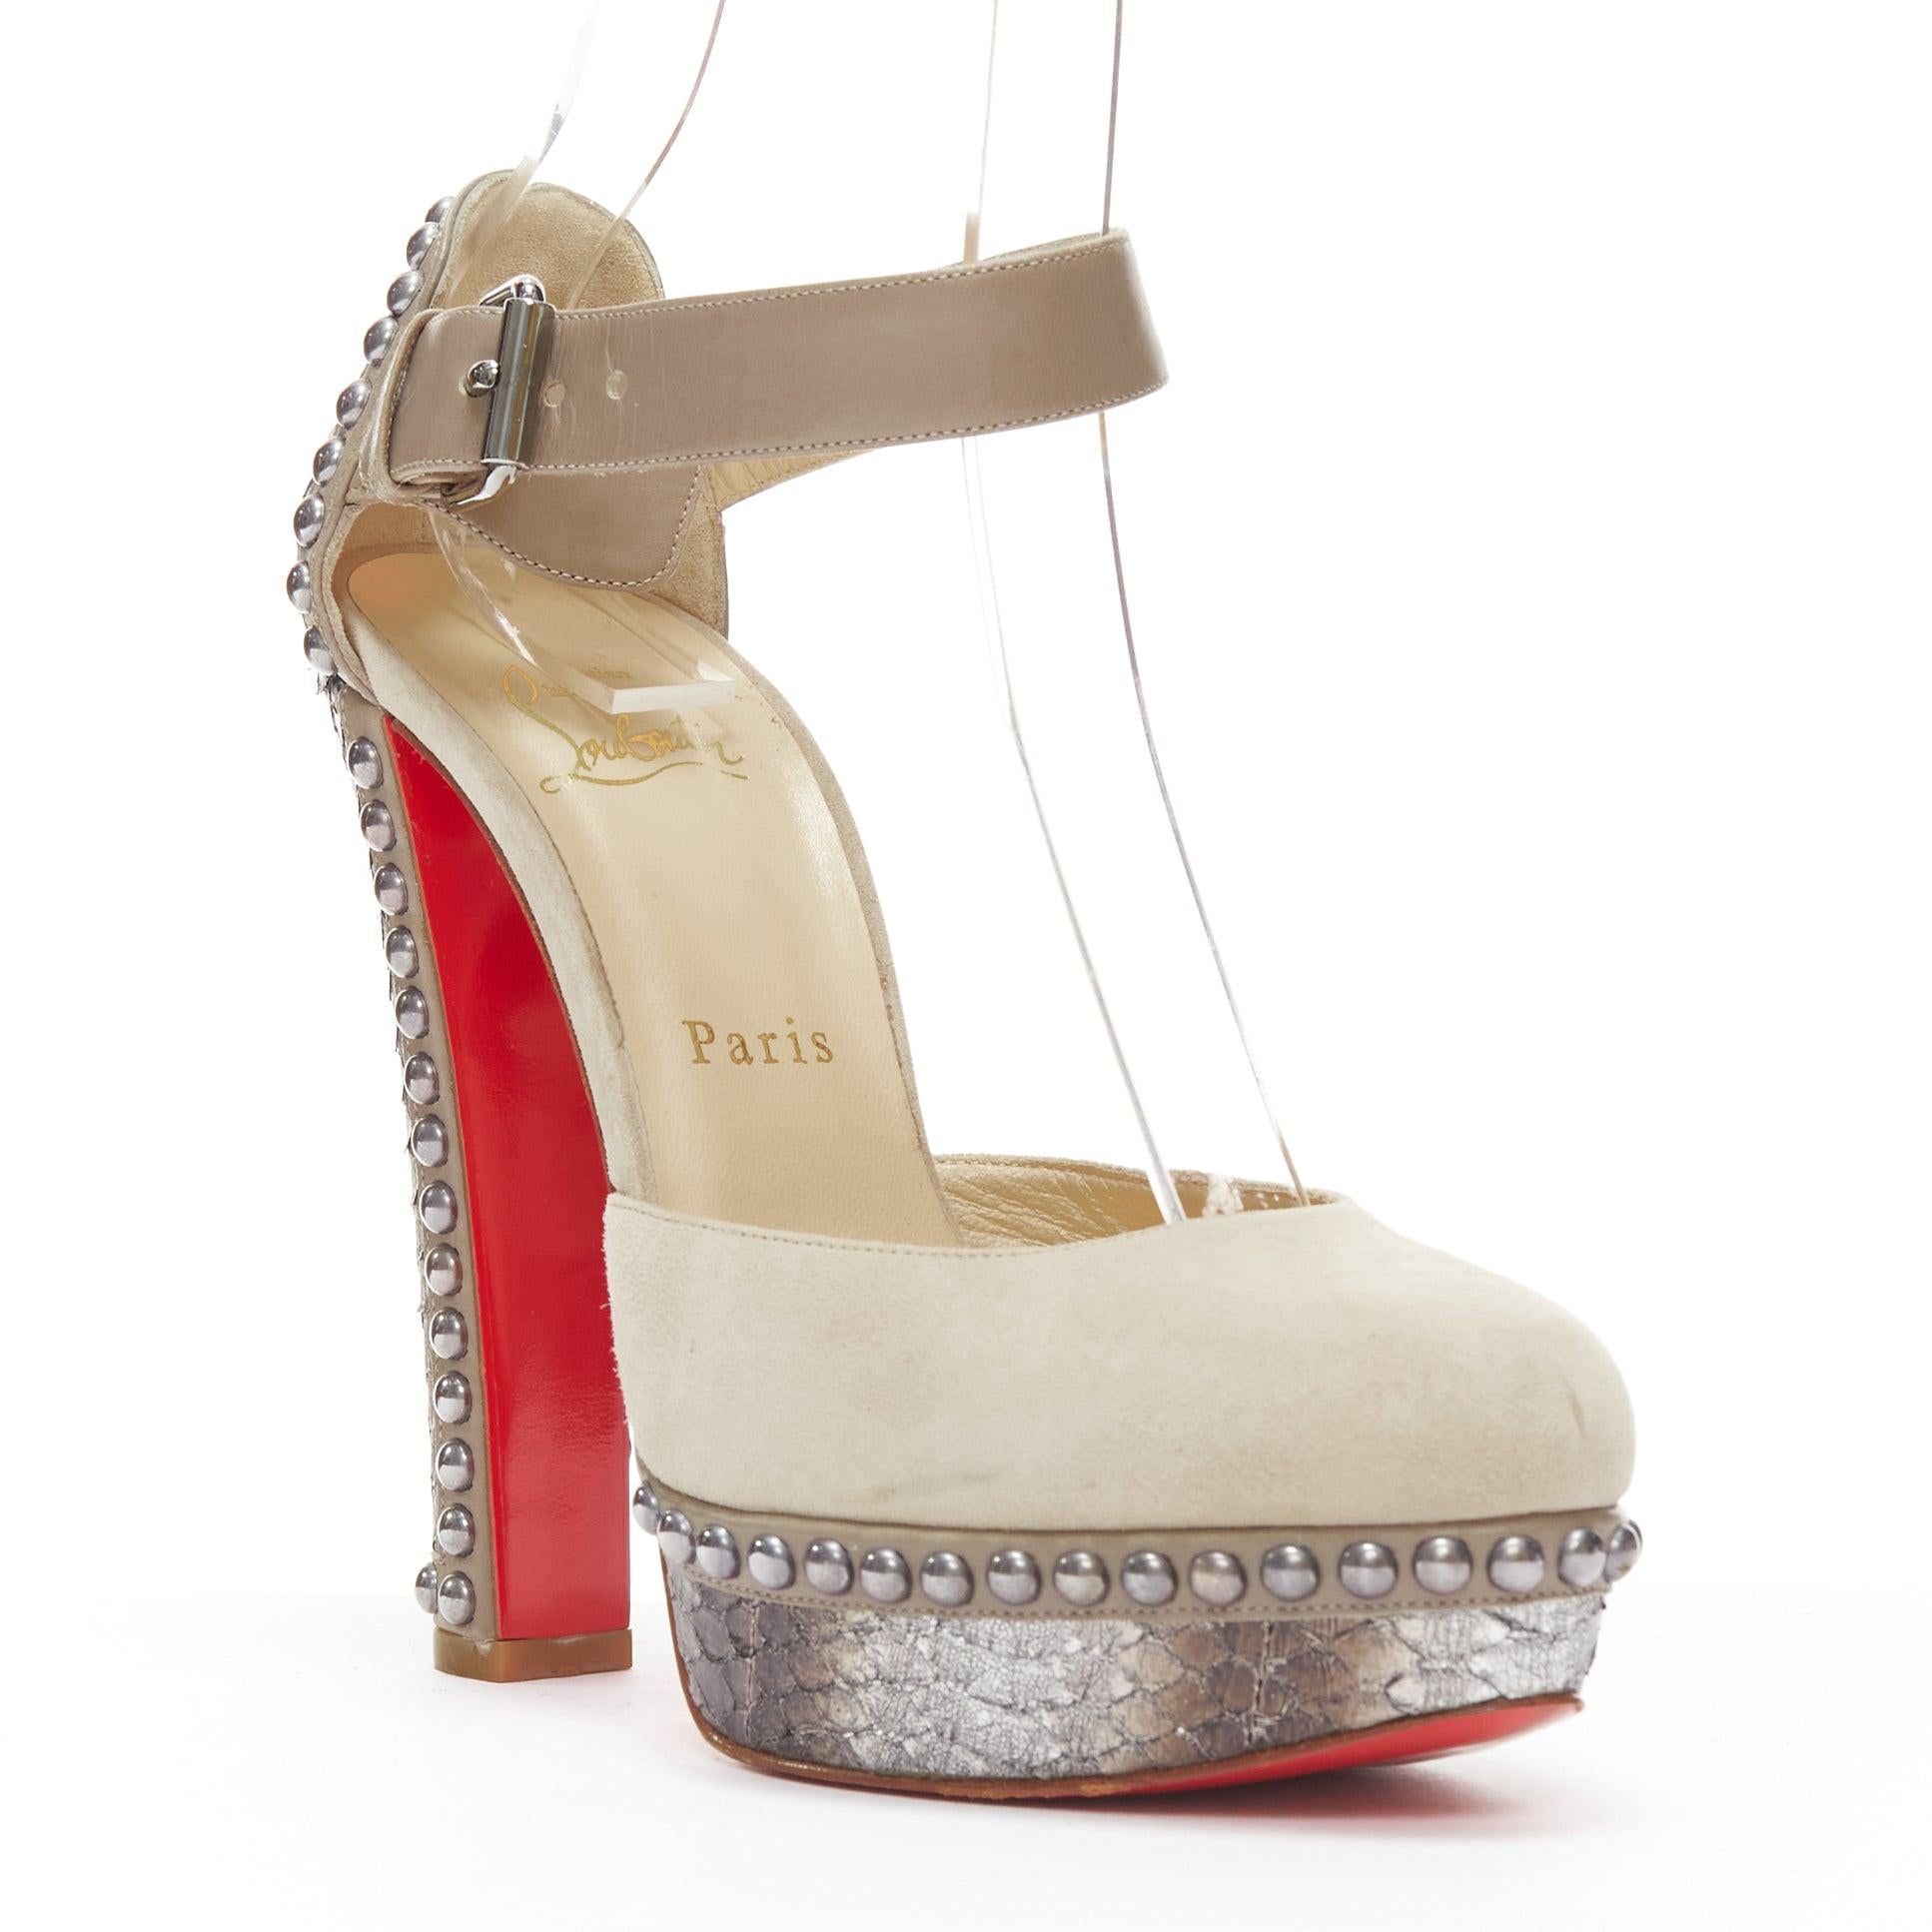 CHRISITAN LOUBOUTIN Luxura 140 grey suede studded scaled platform heel EU37
Reference: NKLL/A00105
Brand: Christian Louboutin
Model: Luxura 140
Material: Suede, Leather
Color: Grey, Silver
Pattern: Animal Print
Closure: Ankle Strap
Lining: Brown